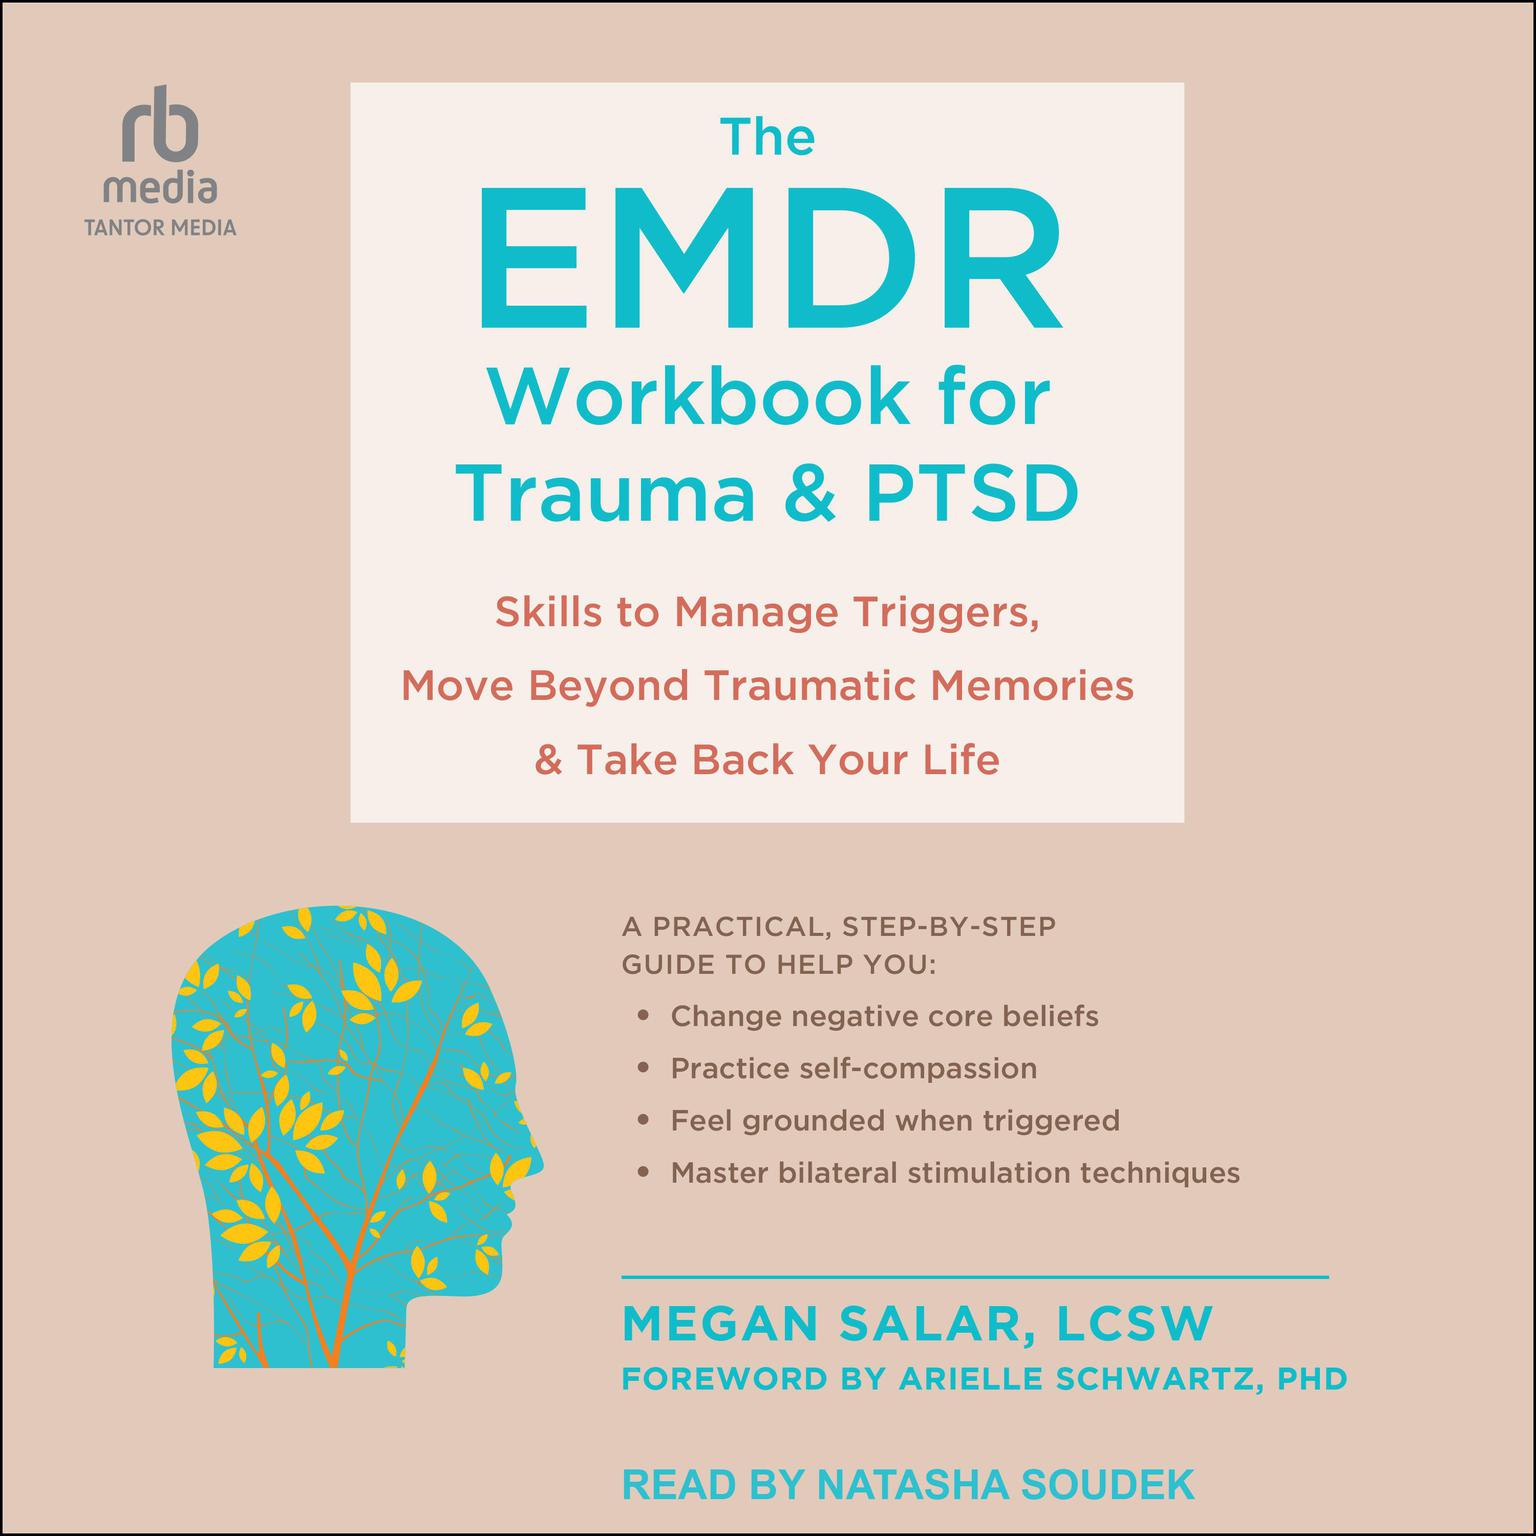 The EMDR Workbook for Trauma and PTSD: Skills to Manage Triggers, Move Beyond Traumatic Memories, and Take Back Your Life Audiobook, by Megan Boardman, LCSW